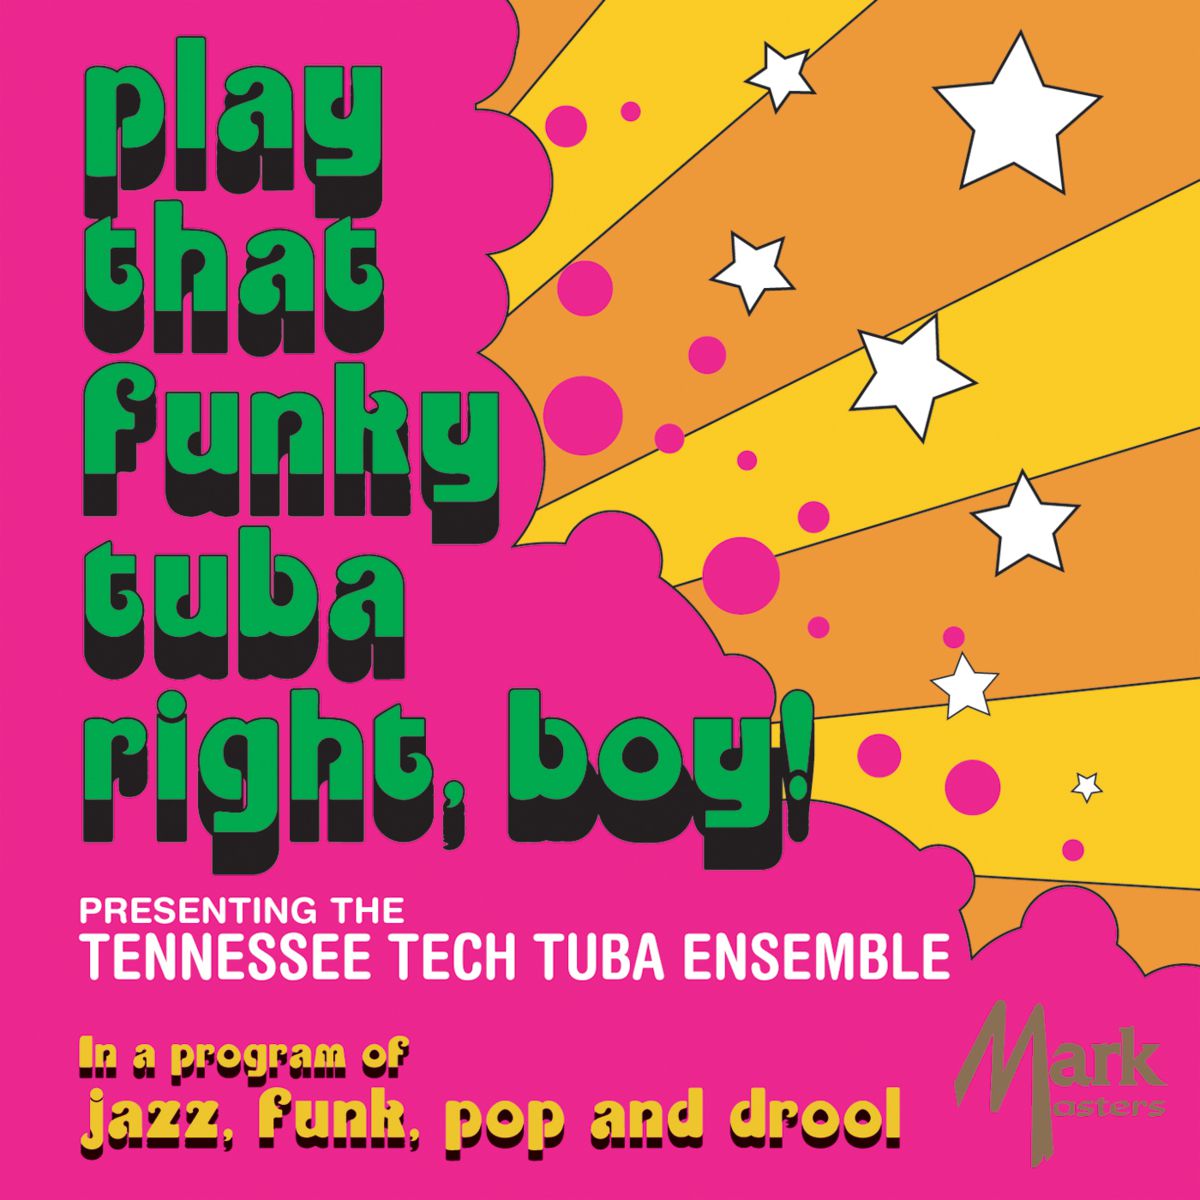 Play That Funky Tuba Right, Boy! - click here